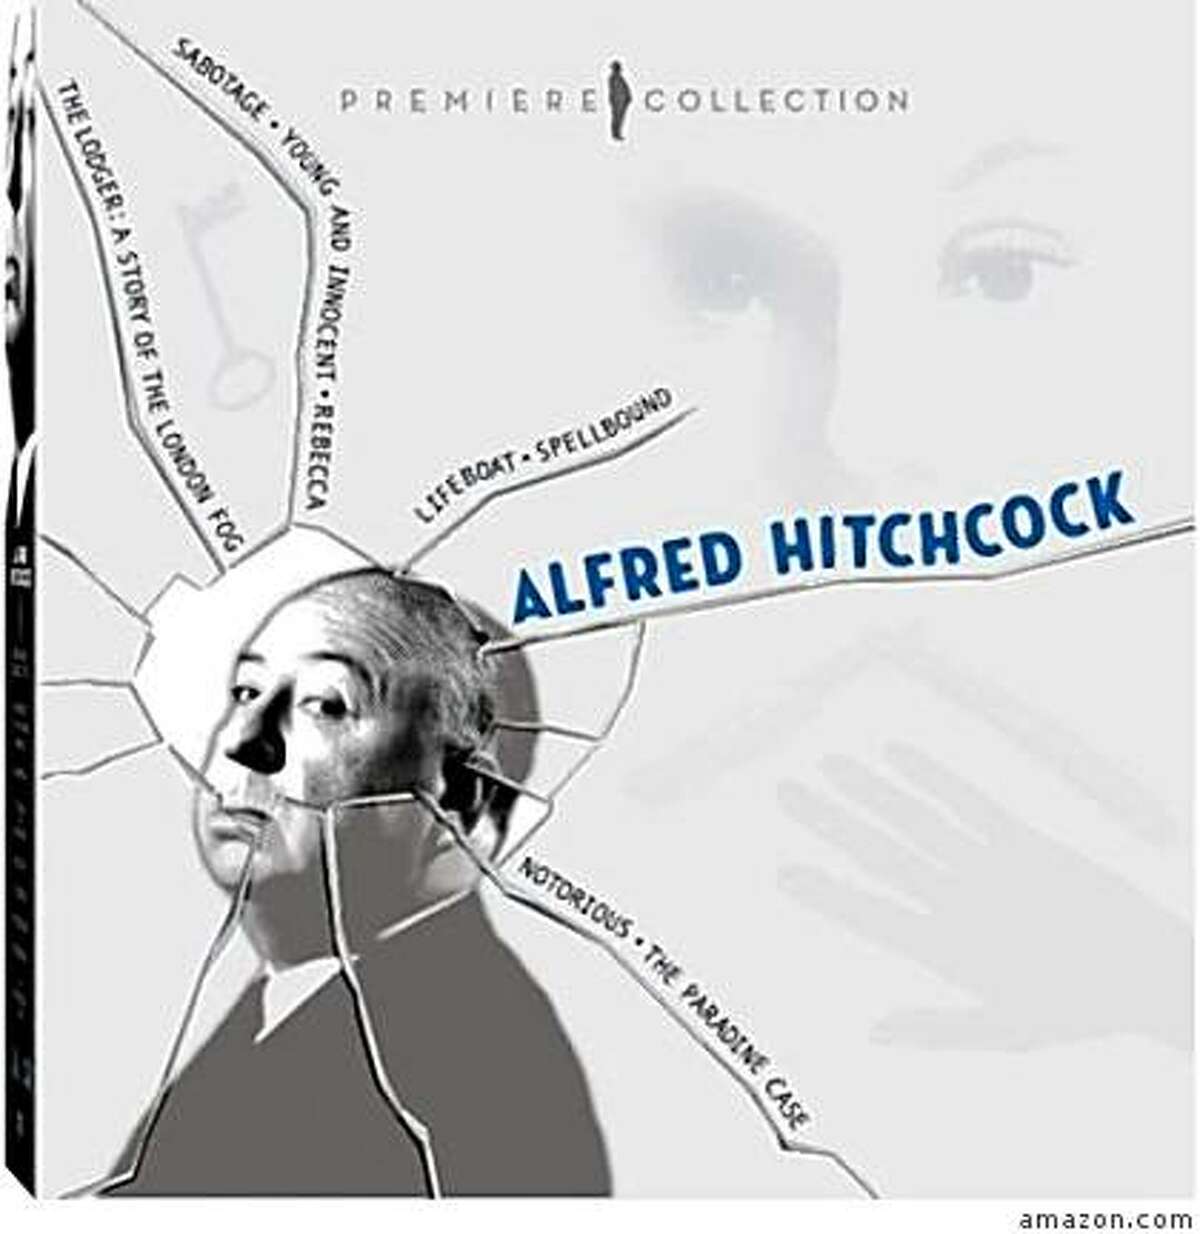 dvd cover ALFRED HITCHCOCK PREMIERE COLLECTION